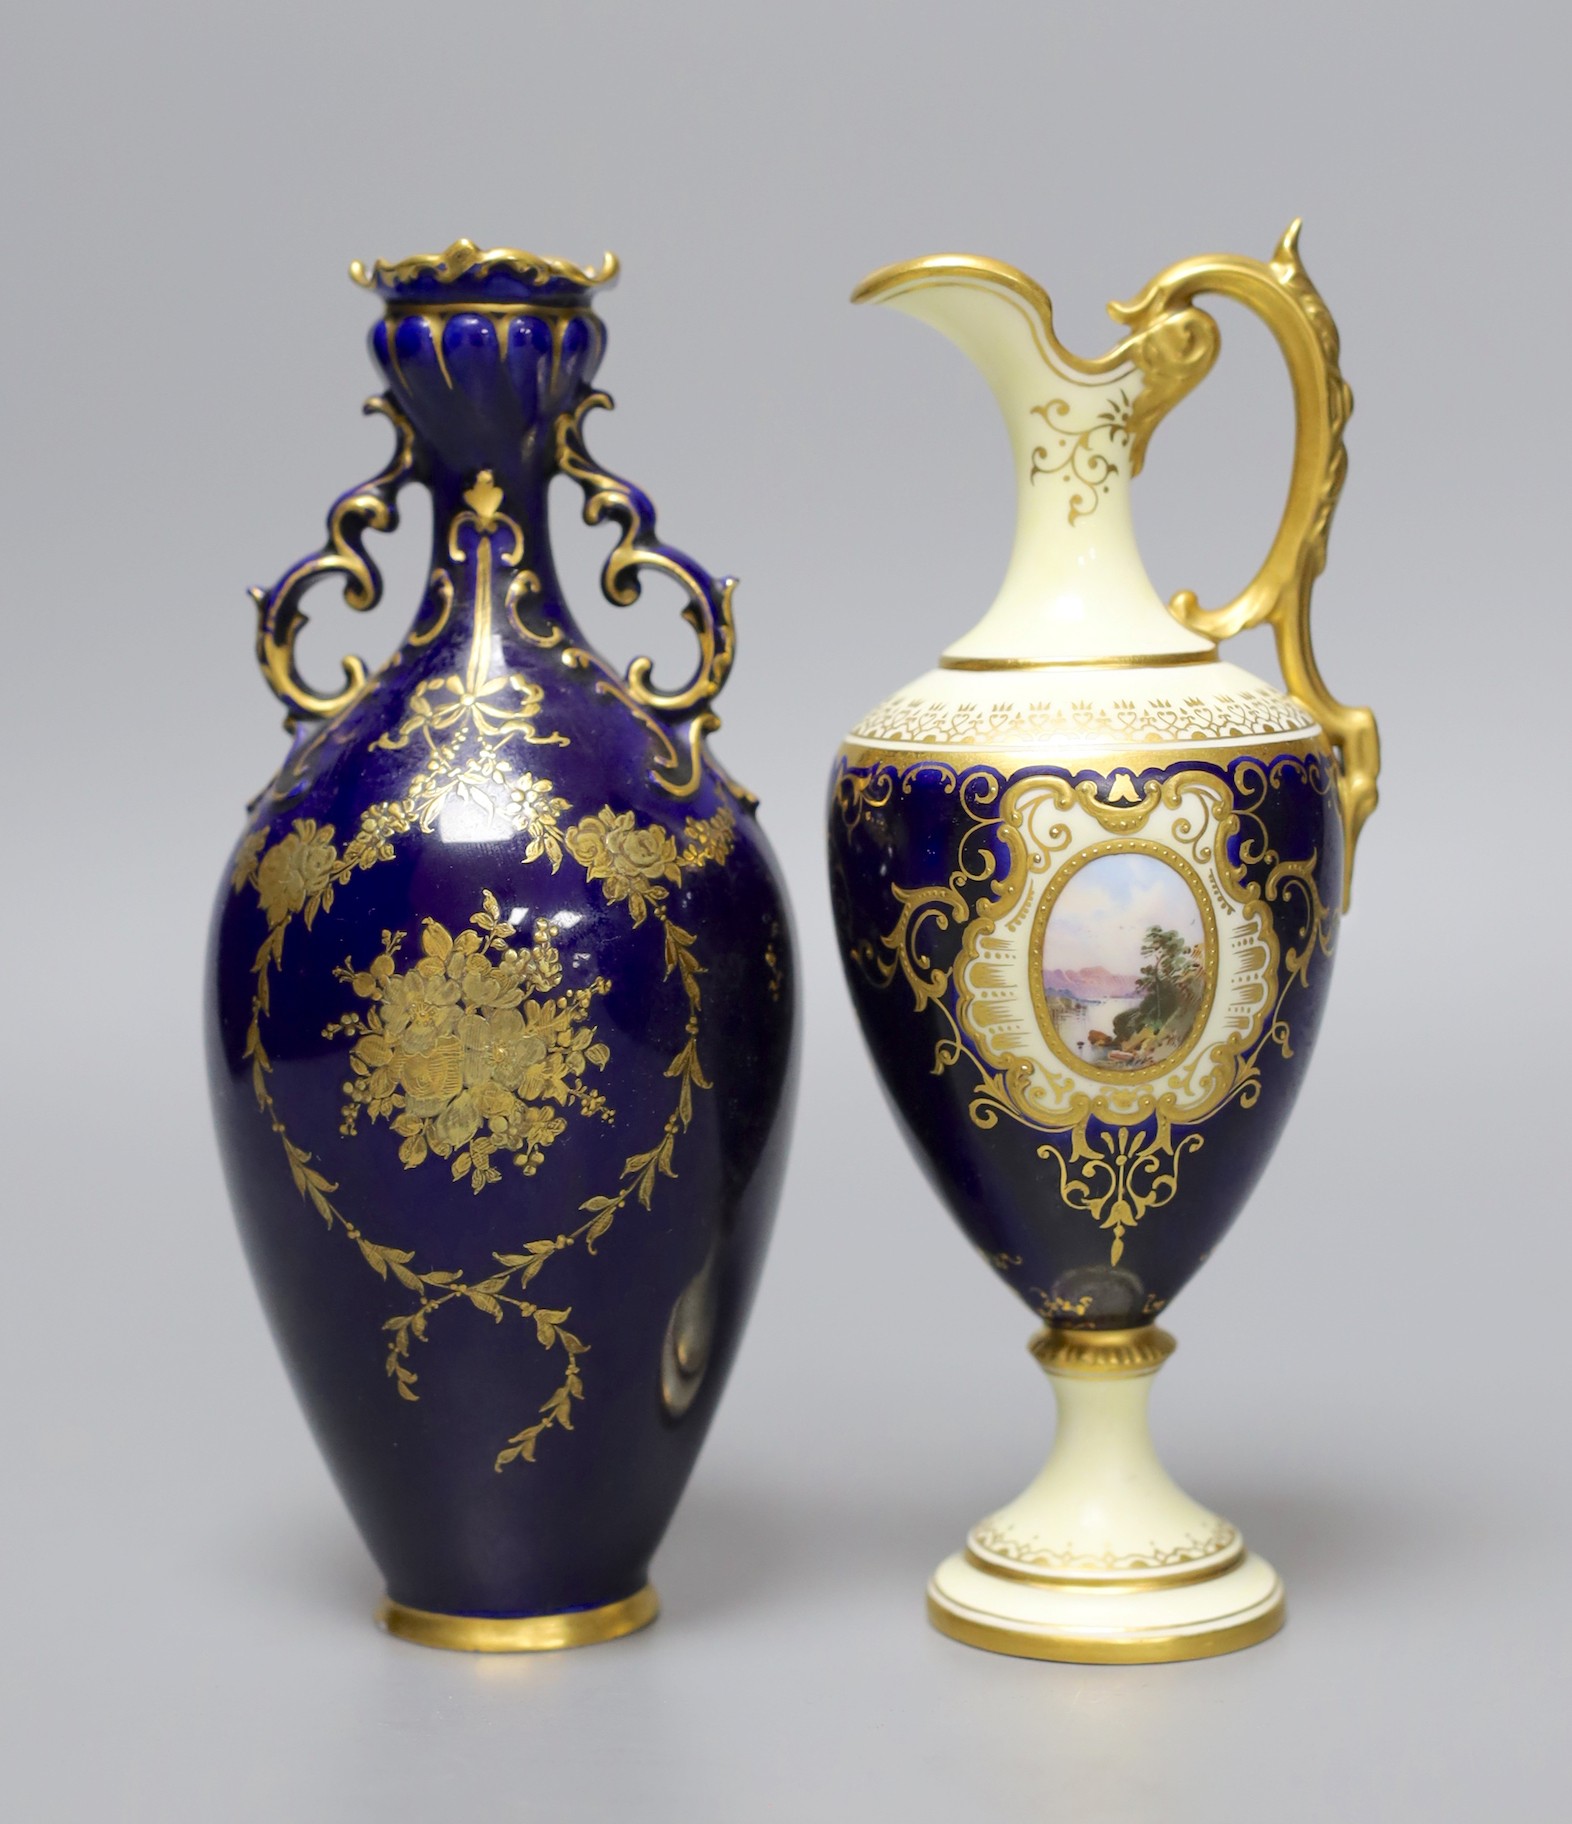 A Coalport blue ground ewer, with a gilded oval panel with a loch scene, c.1900, and a Royal Crown Derby vase with raised gilded decoration on a cobalt blue ground, date code 1898, tallest 18cm